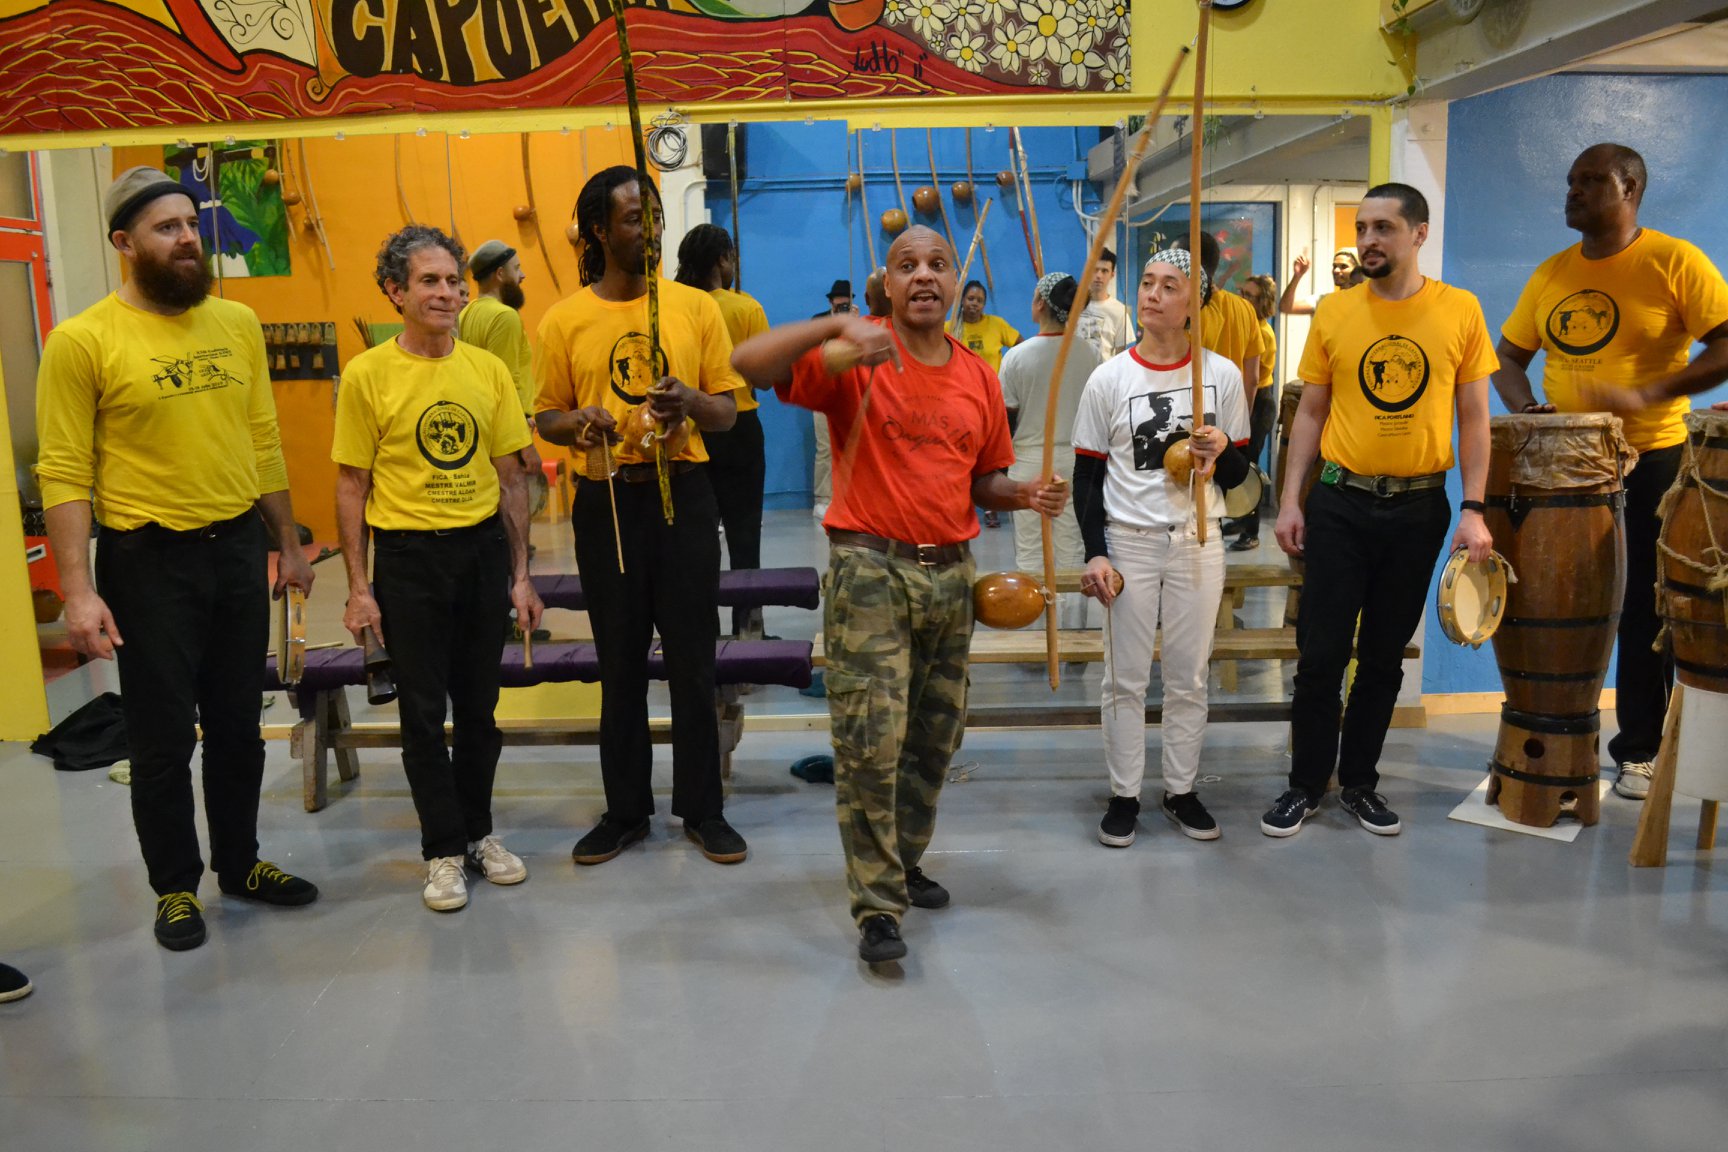 Silvio holding the Berimbau and teaching in a roda (capoeira cypher). They are in a brightly colored studio with many Berimbaus on the wall. 